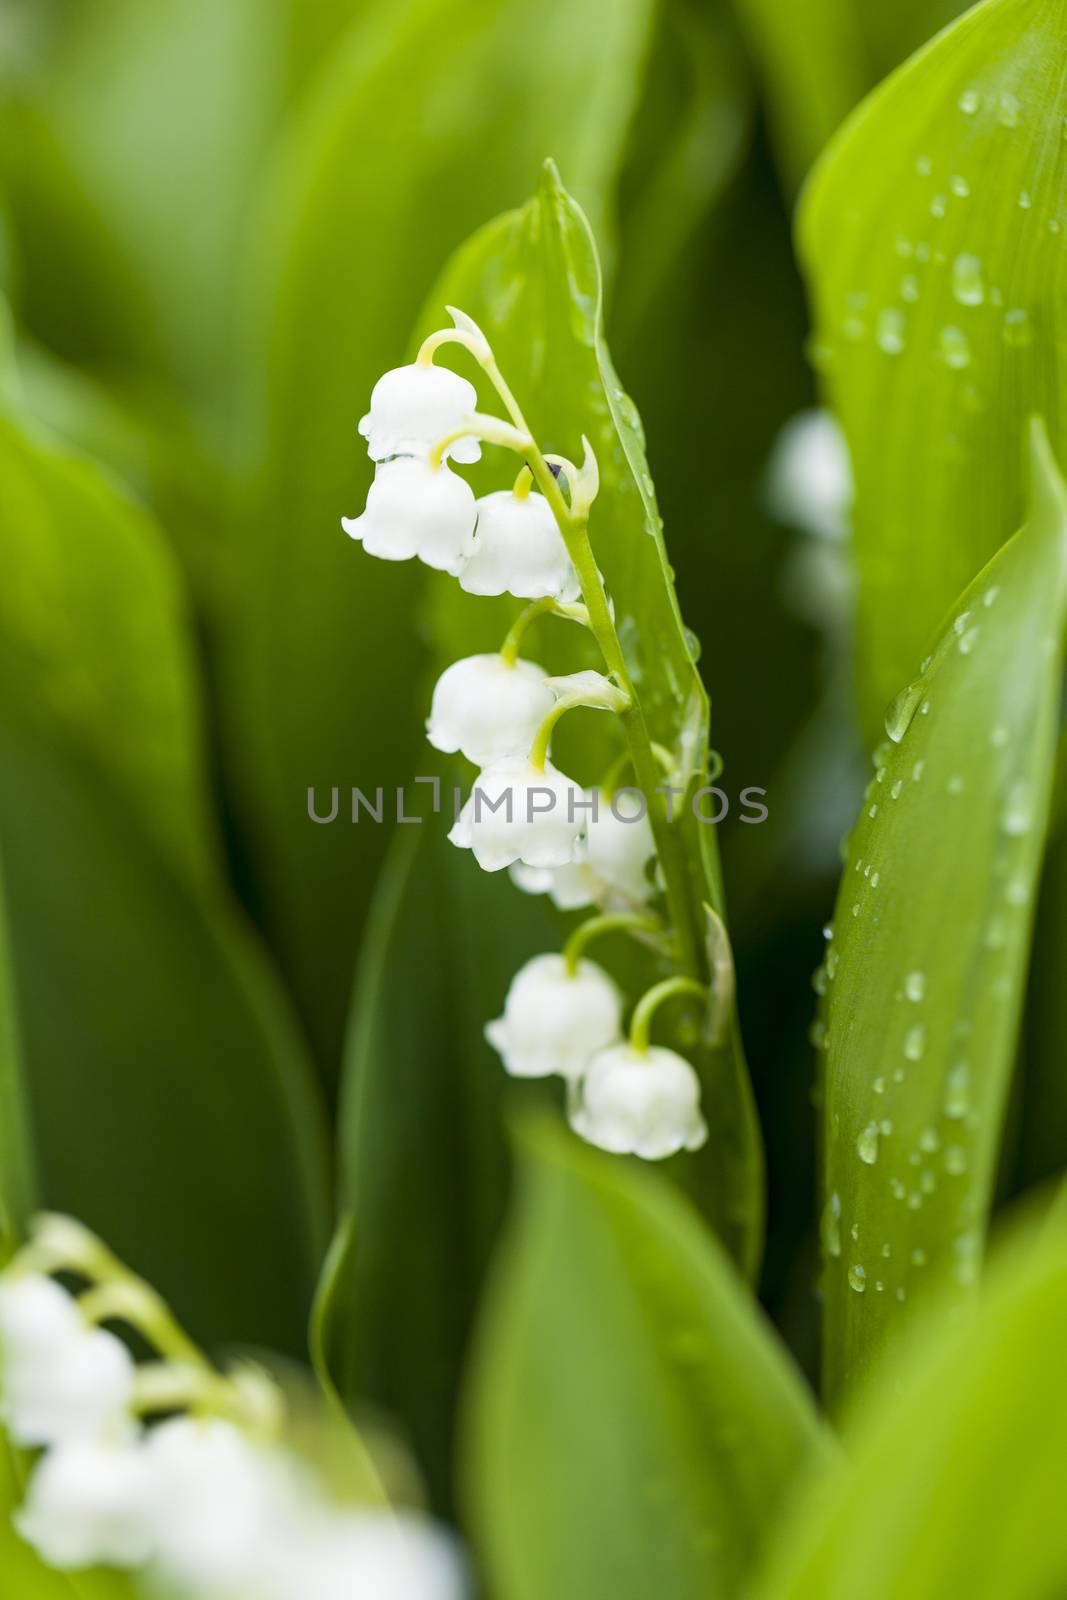 Lily of the valley flowers with water drops on green background. by mariusz_prusaczyk